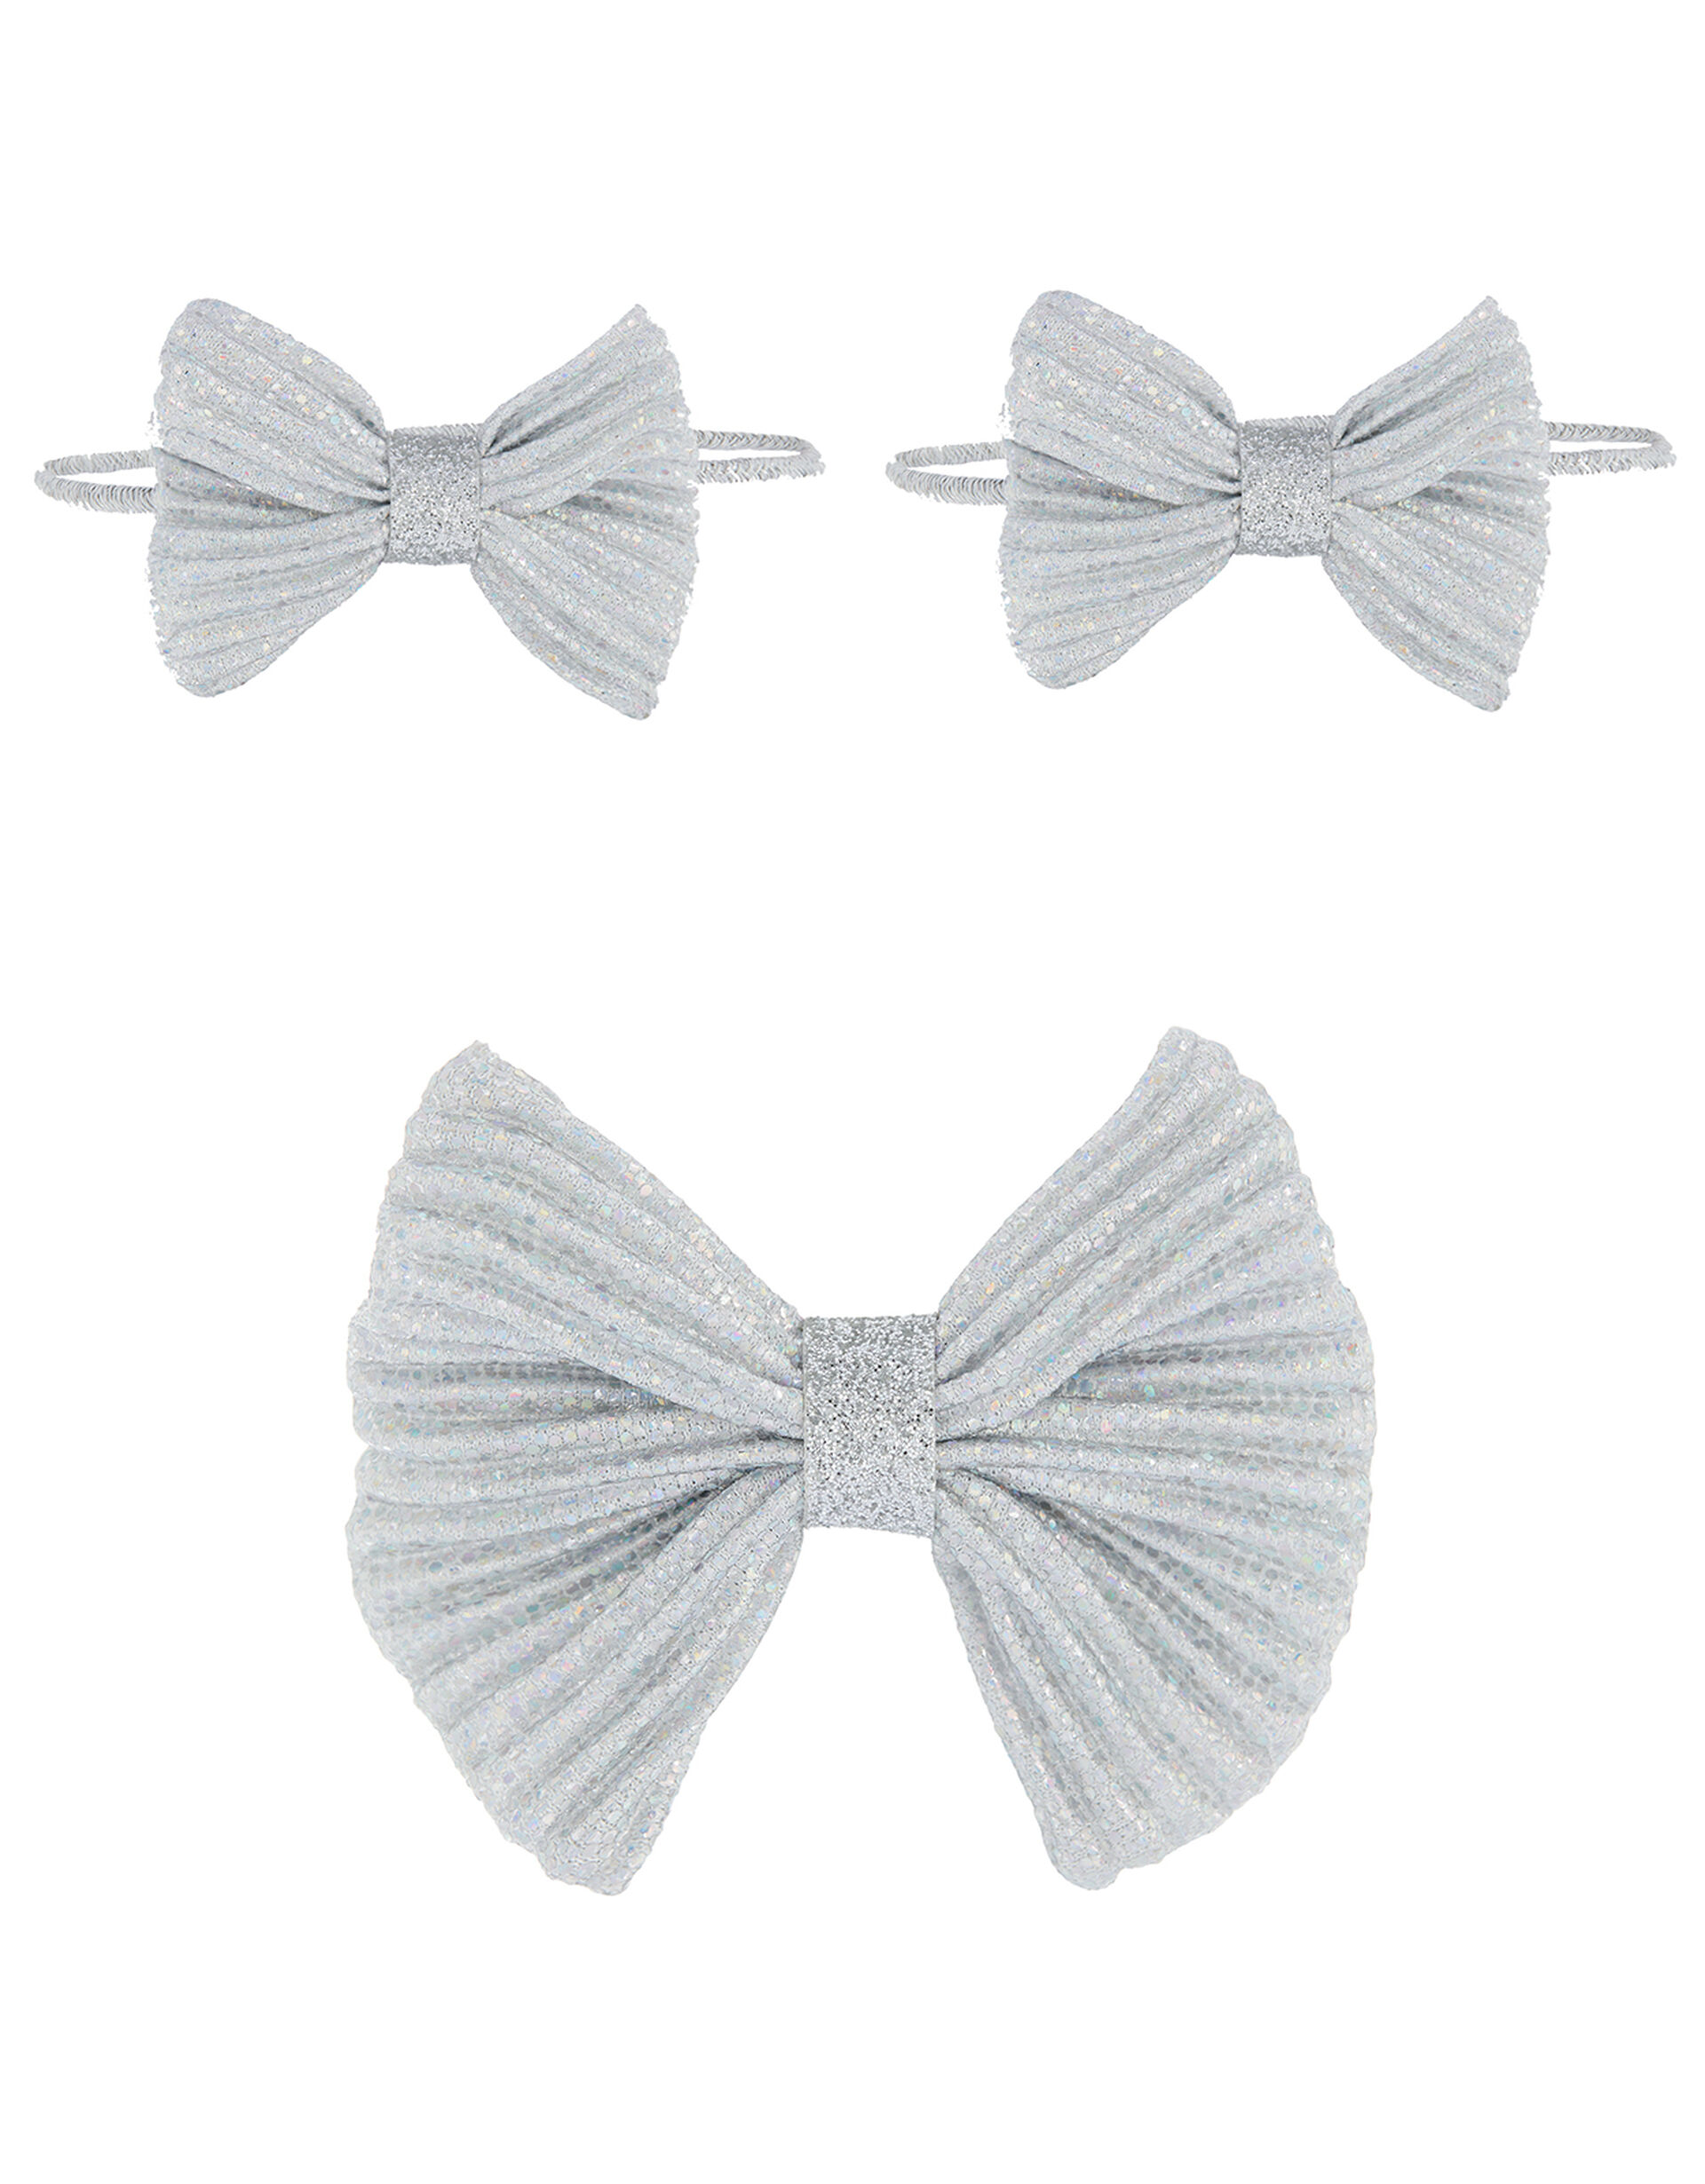 Shimmer Bow Hair Accessory Set, , large